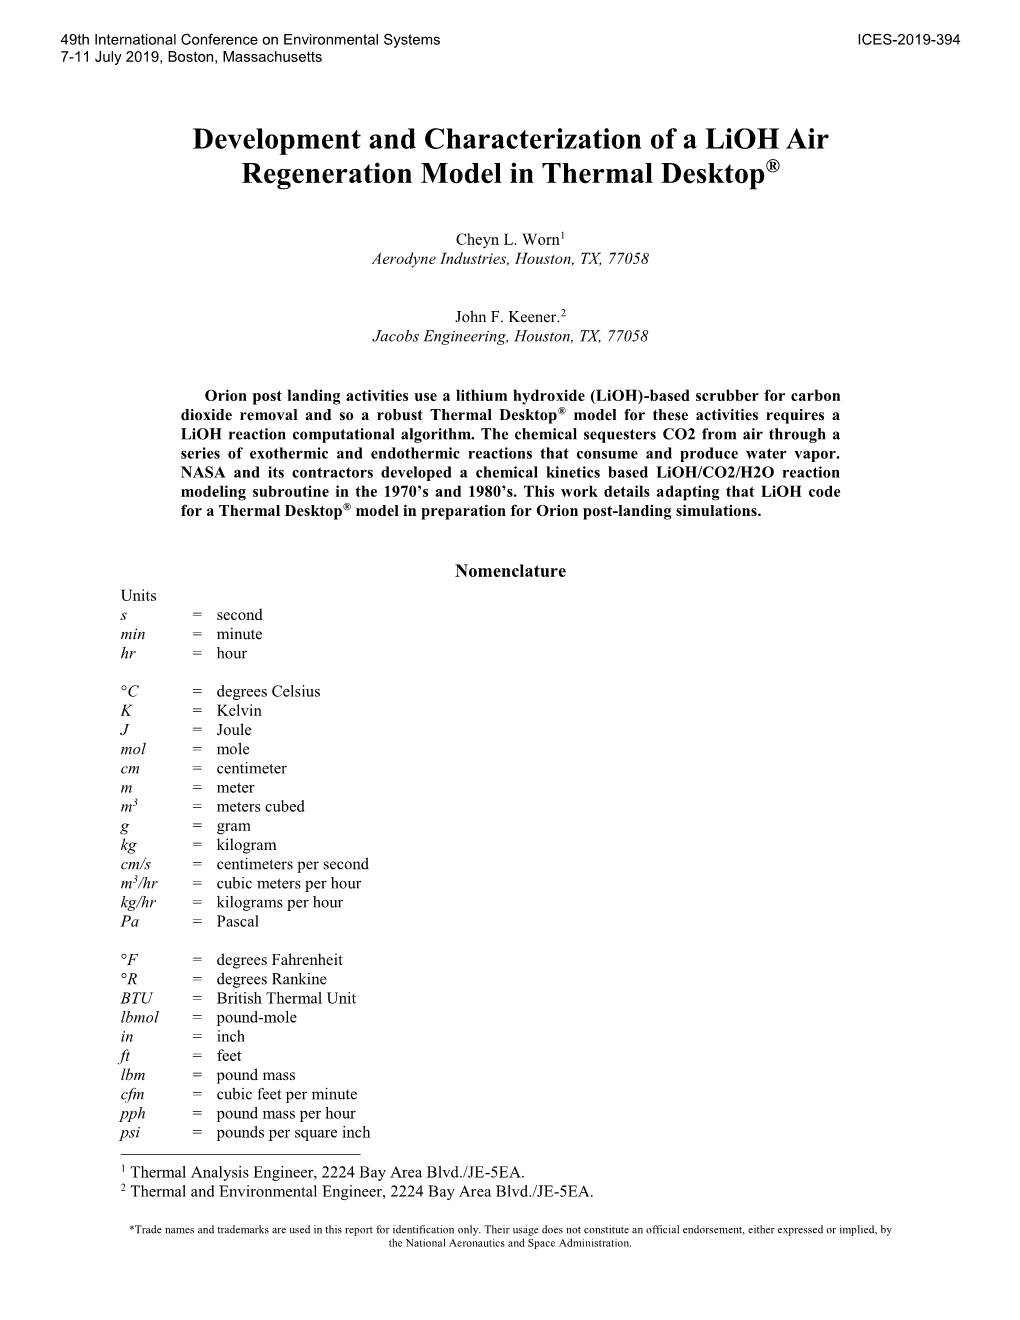 Development and Characterization of a Lioh Air Regeneration Model in Thermal Desktop®